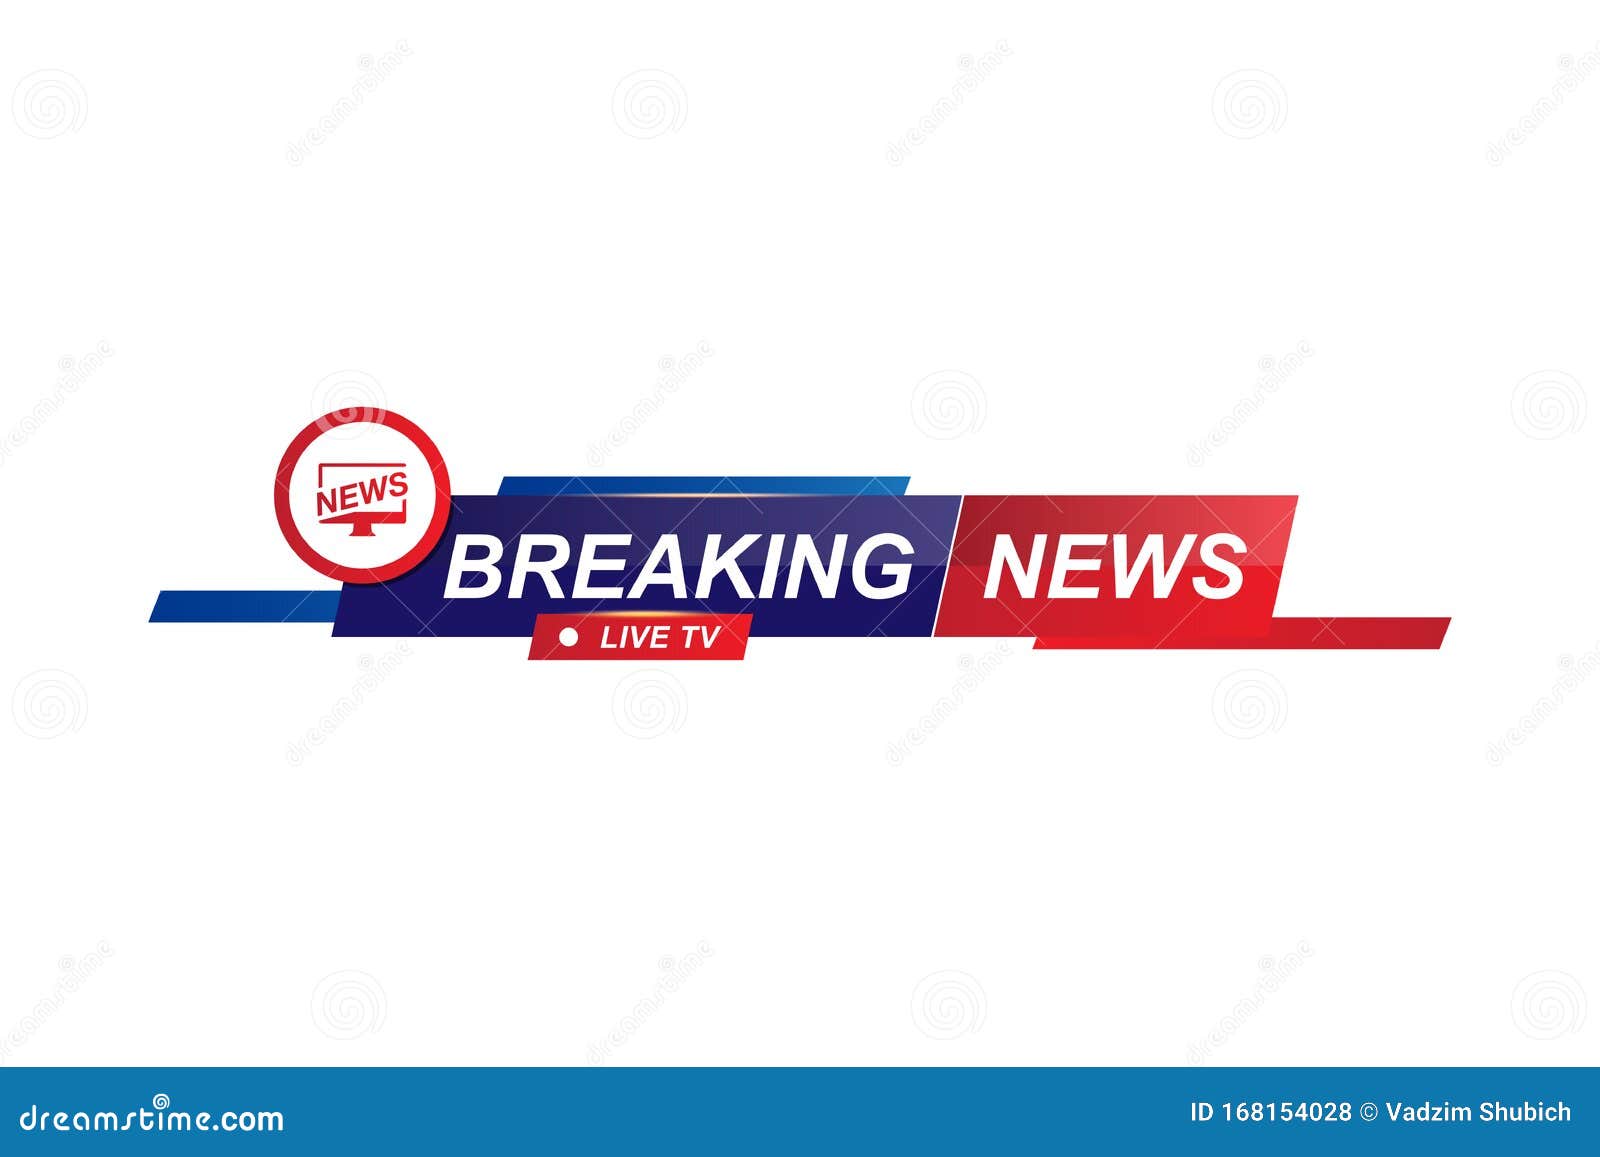 Breaking News Template Title For Screen Tv Channel On White Background Flat Vector Illustration Eps10 Stock Illustration Illustration Of Design Flat